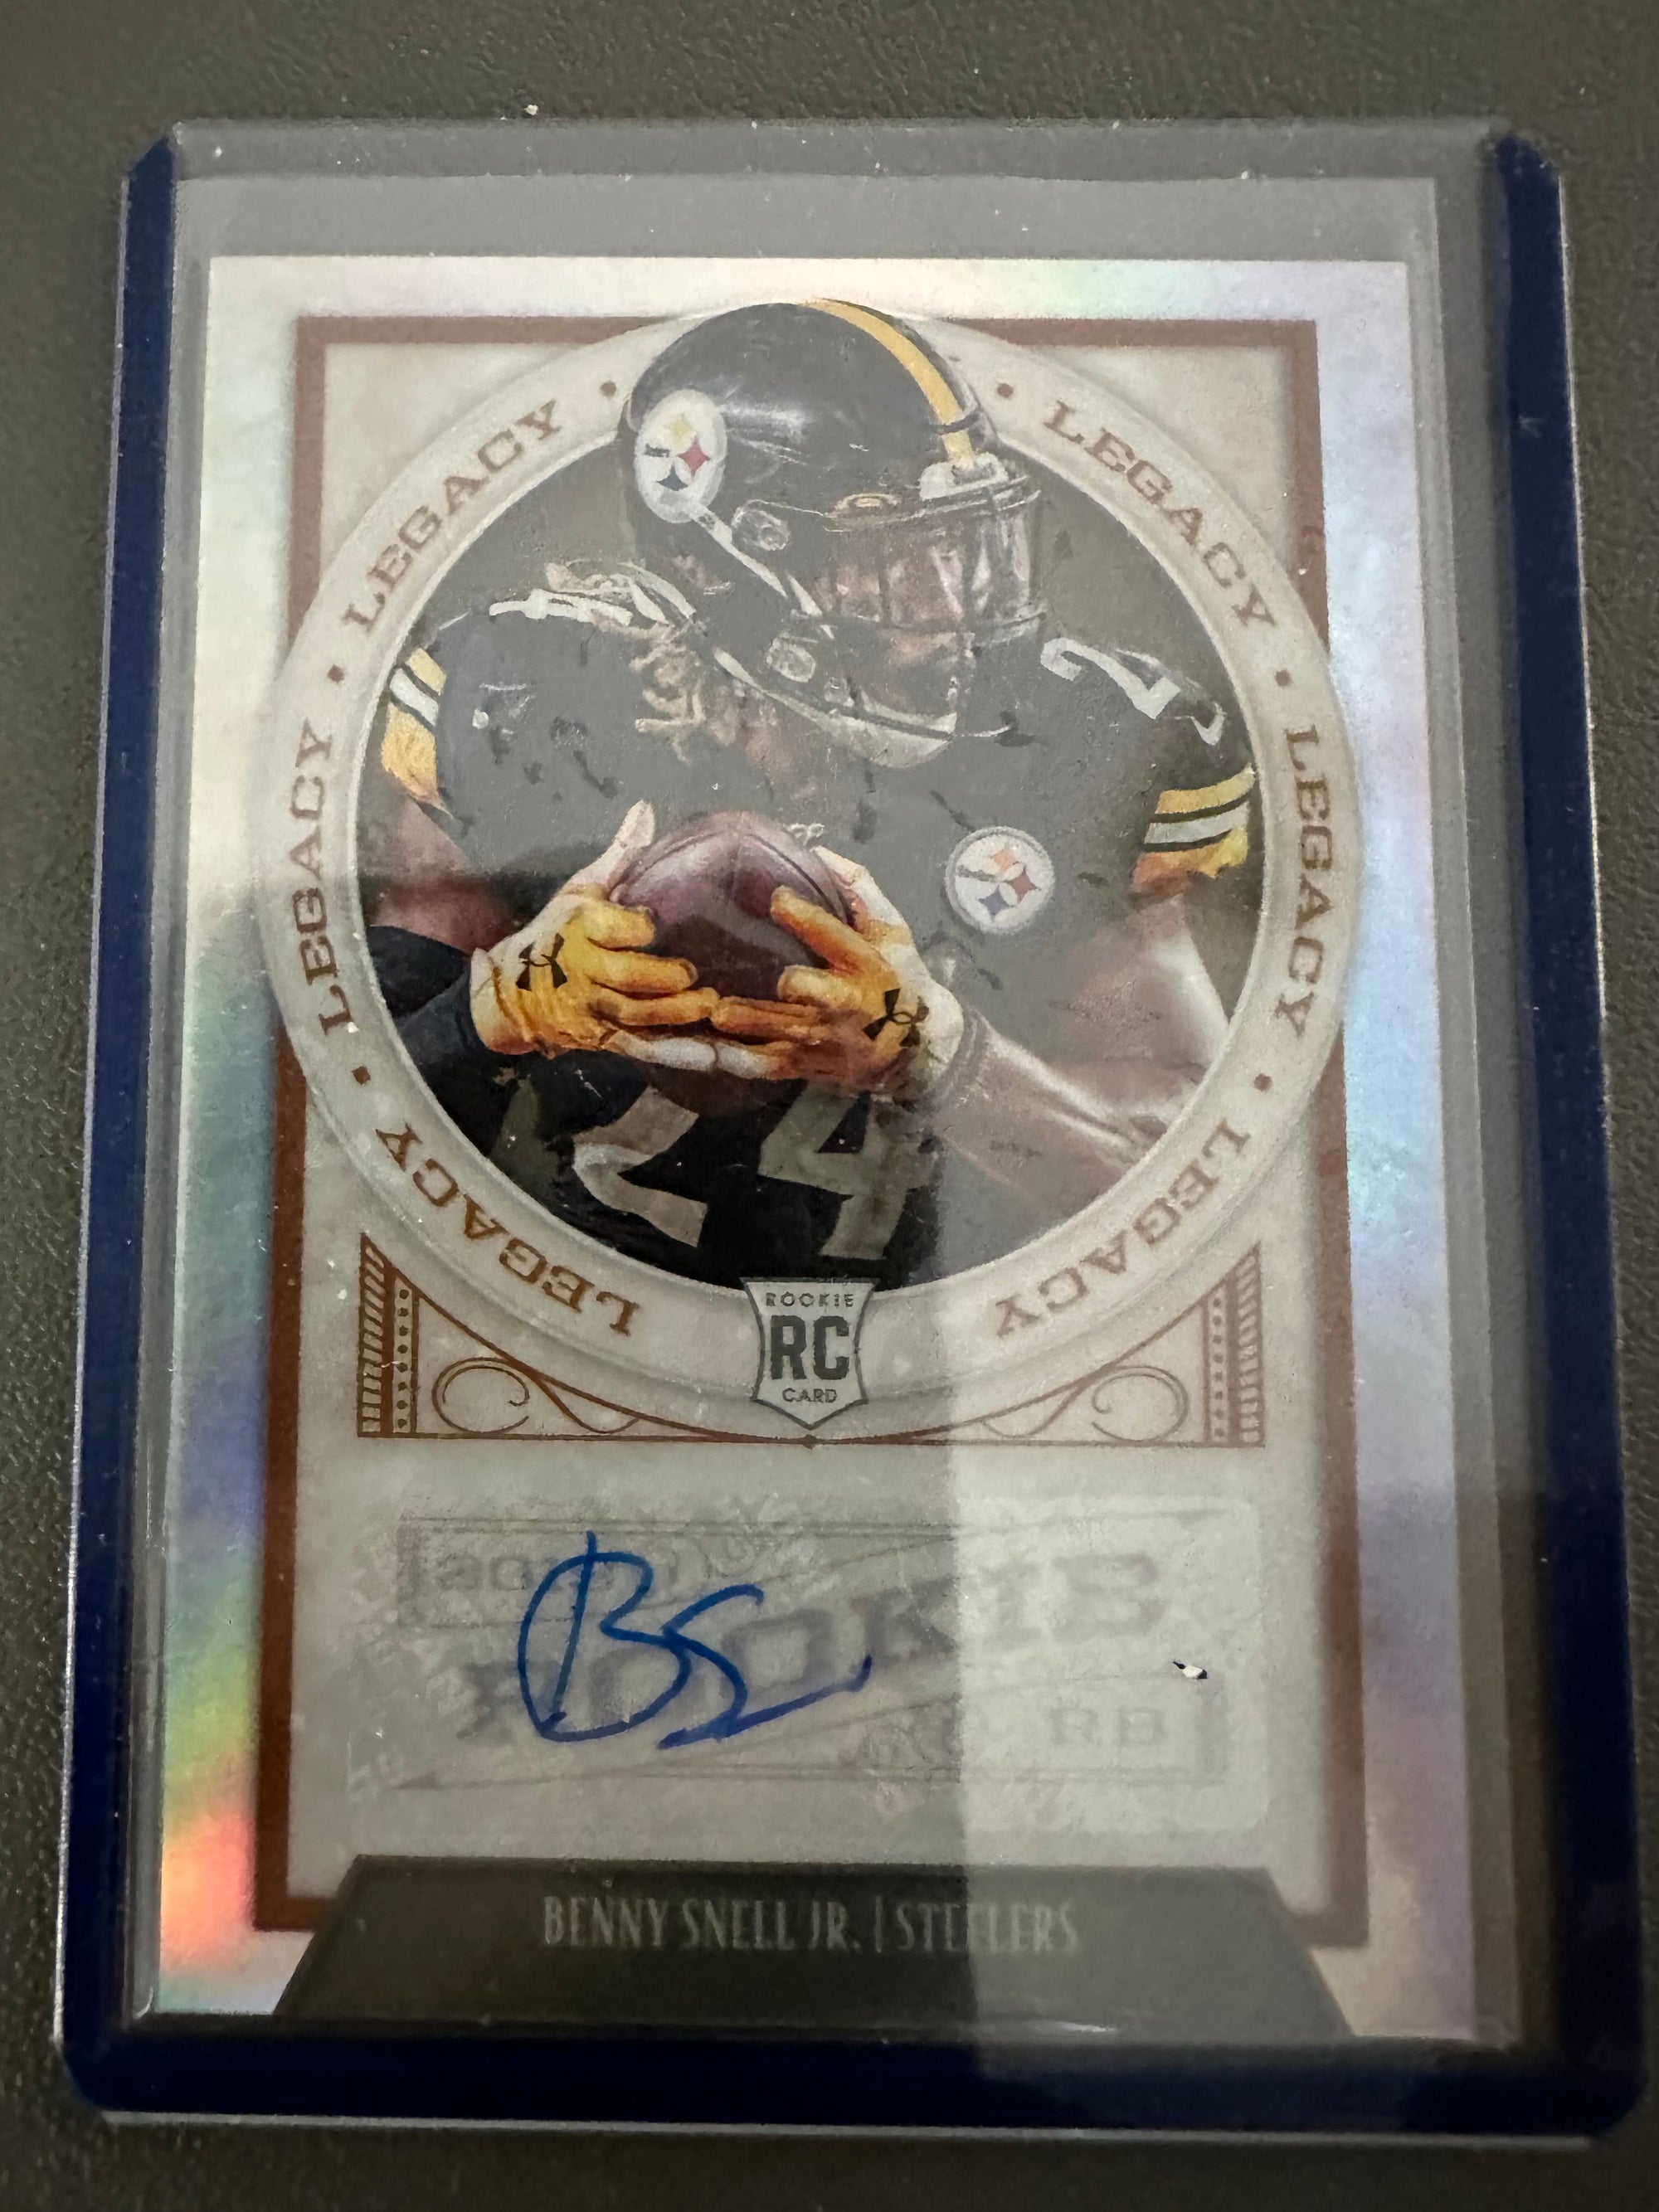 2019 Chronicles Legacy Silver Benny Snell Jr. Rookie Auto 79/99!